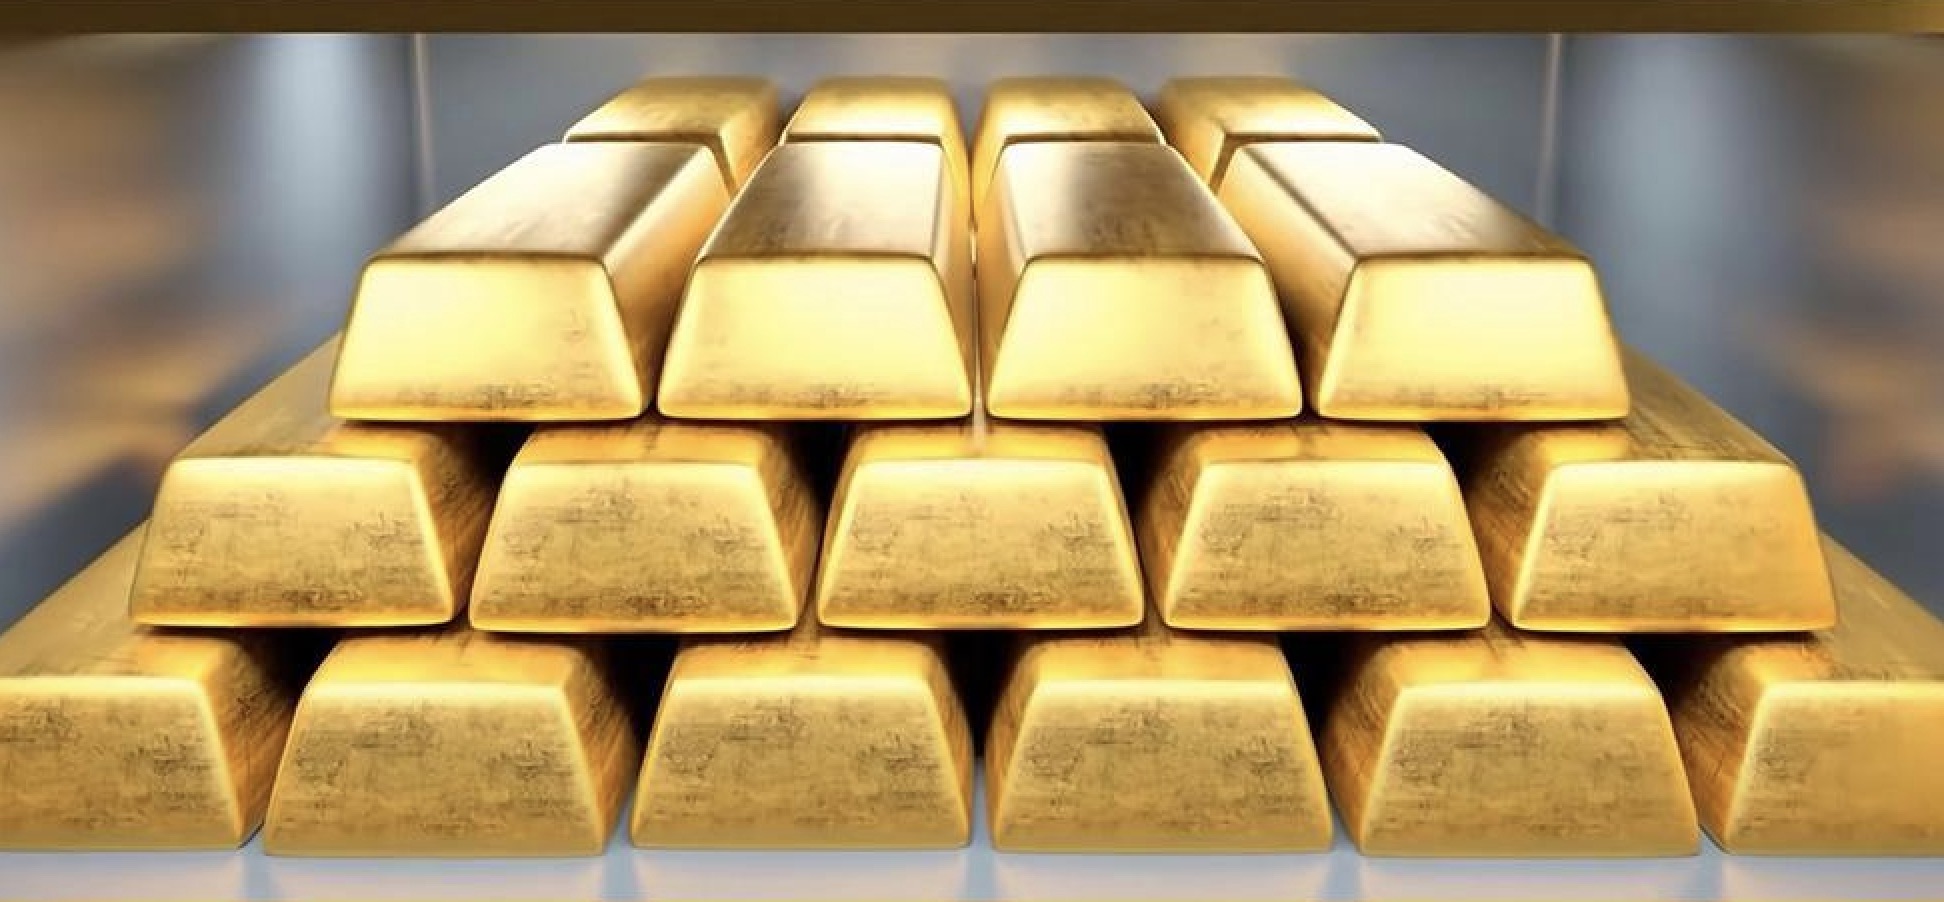 Gold market outlook: The market is seeking guidance from the Federal Reserve on interest rate cuts this week. Gold prices will be difficult to rise significantly in the short term.